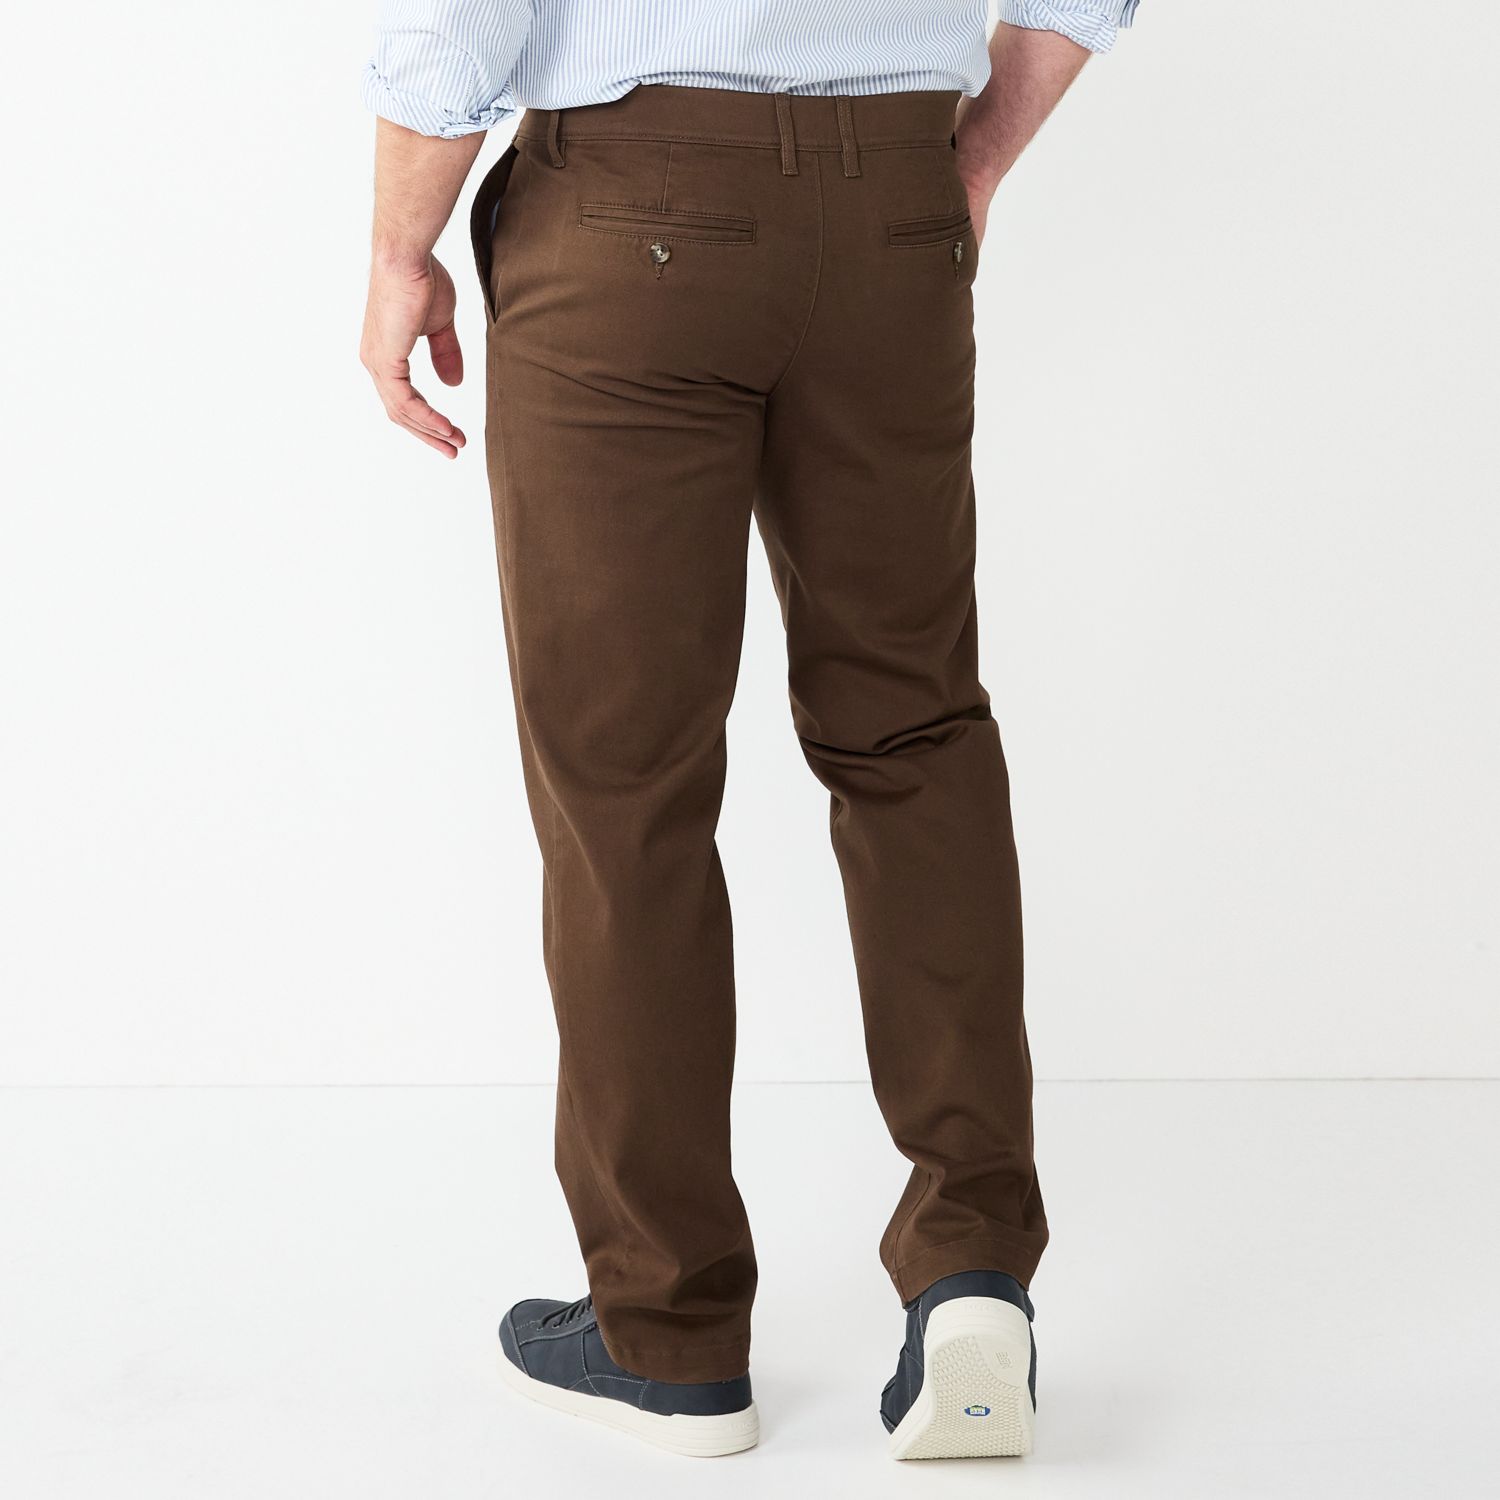 Mens Sonoma Goods For Life Straight Pants - Bottoms, Clothing